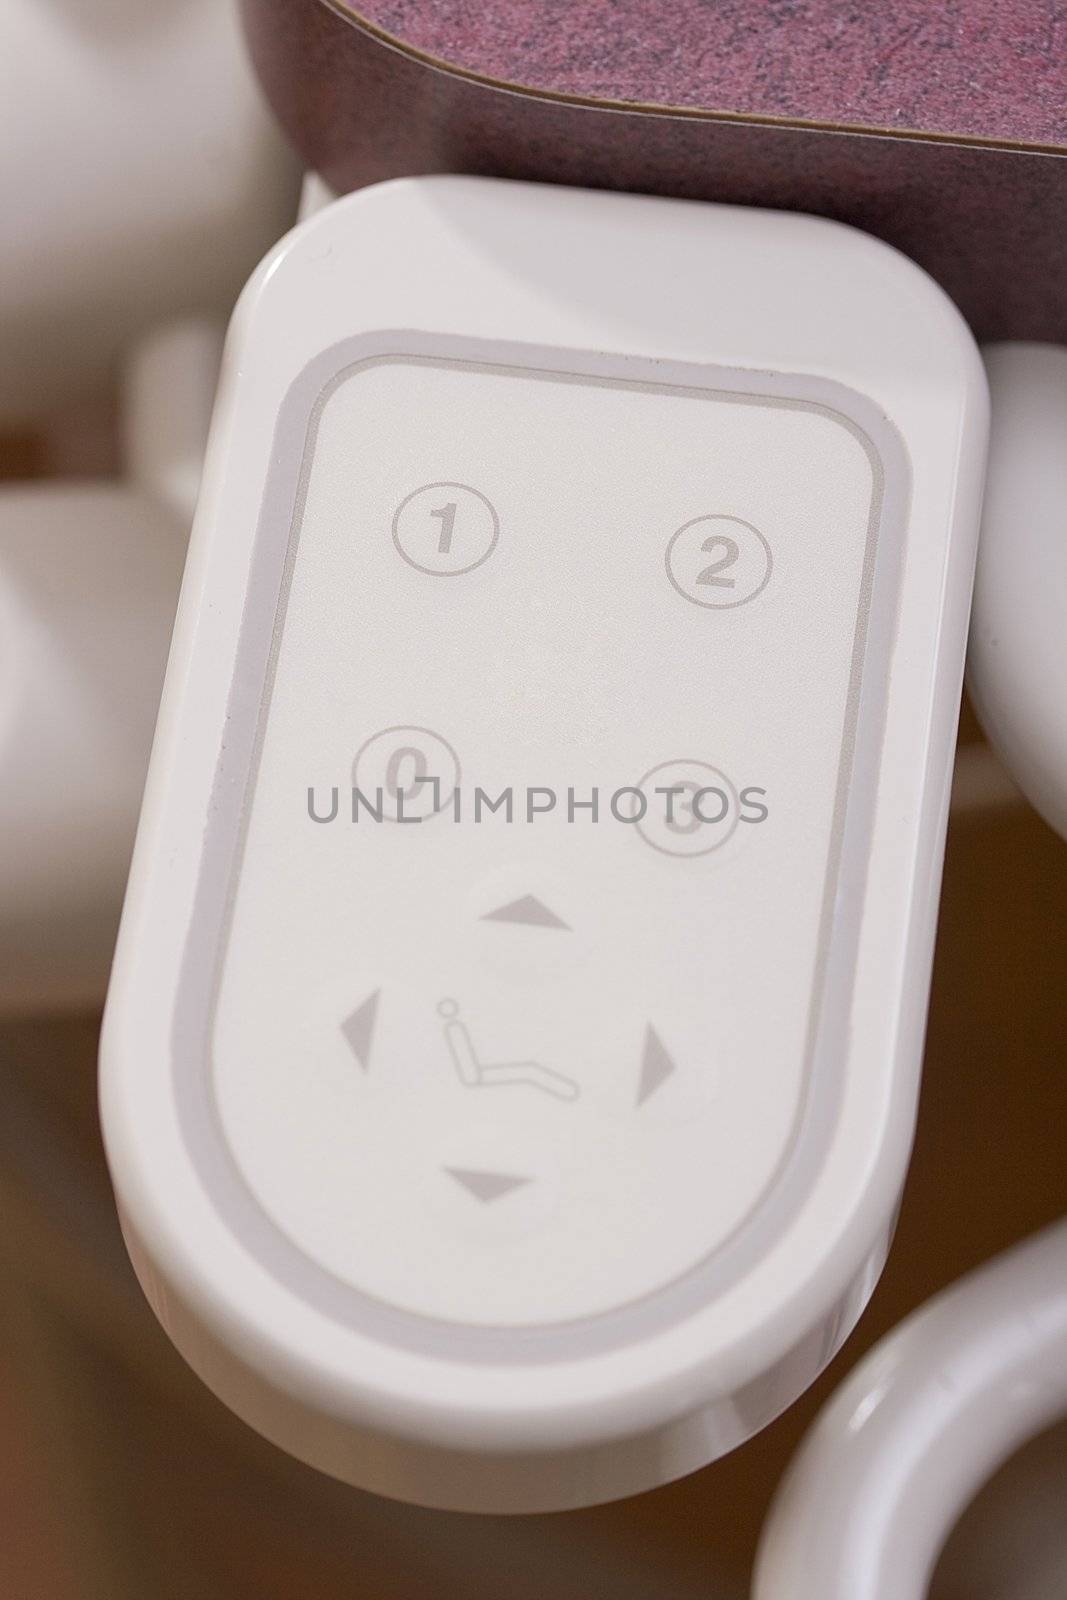 Close-up of a remote control to a dentist chair.